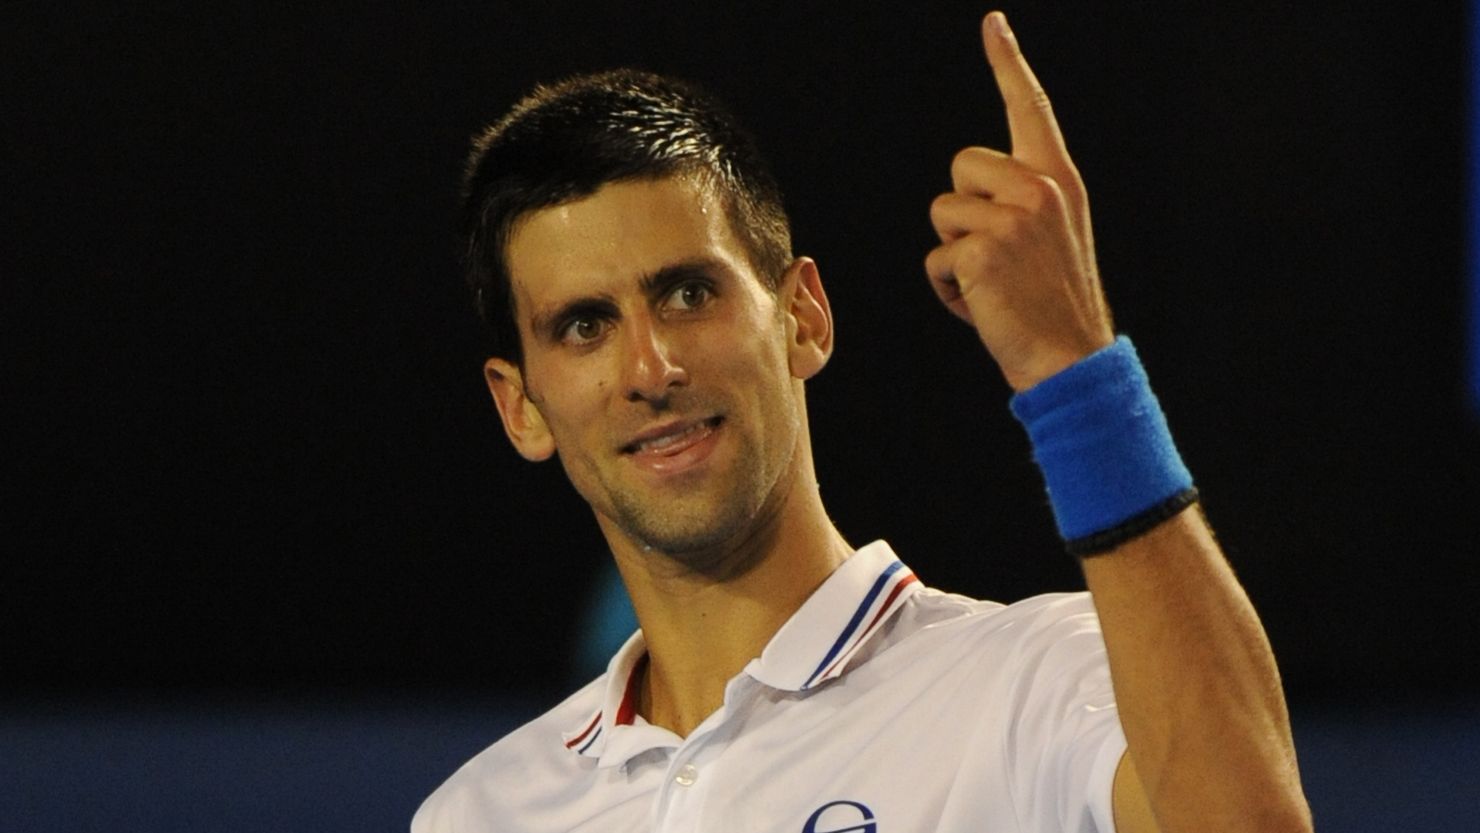 World No. 1 Novak Djokovic won three out of four grand slam titles in 2011, including the Australian Open.